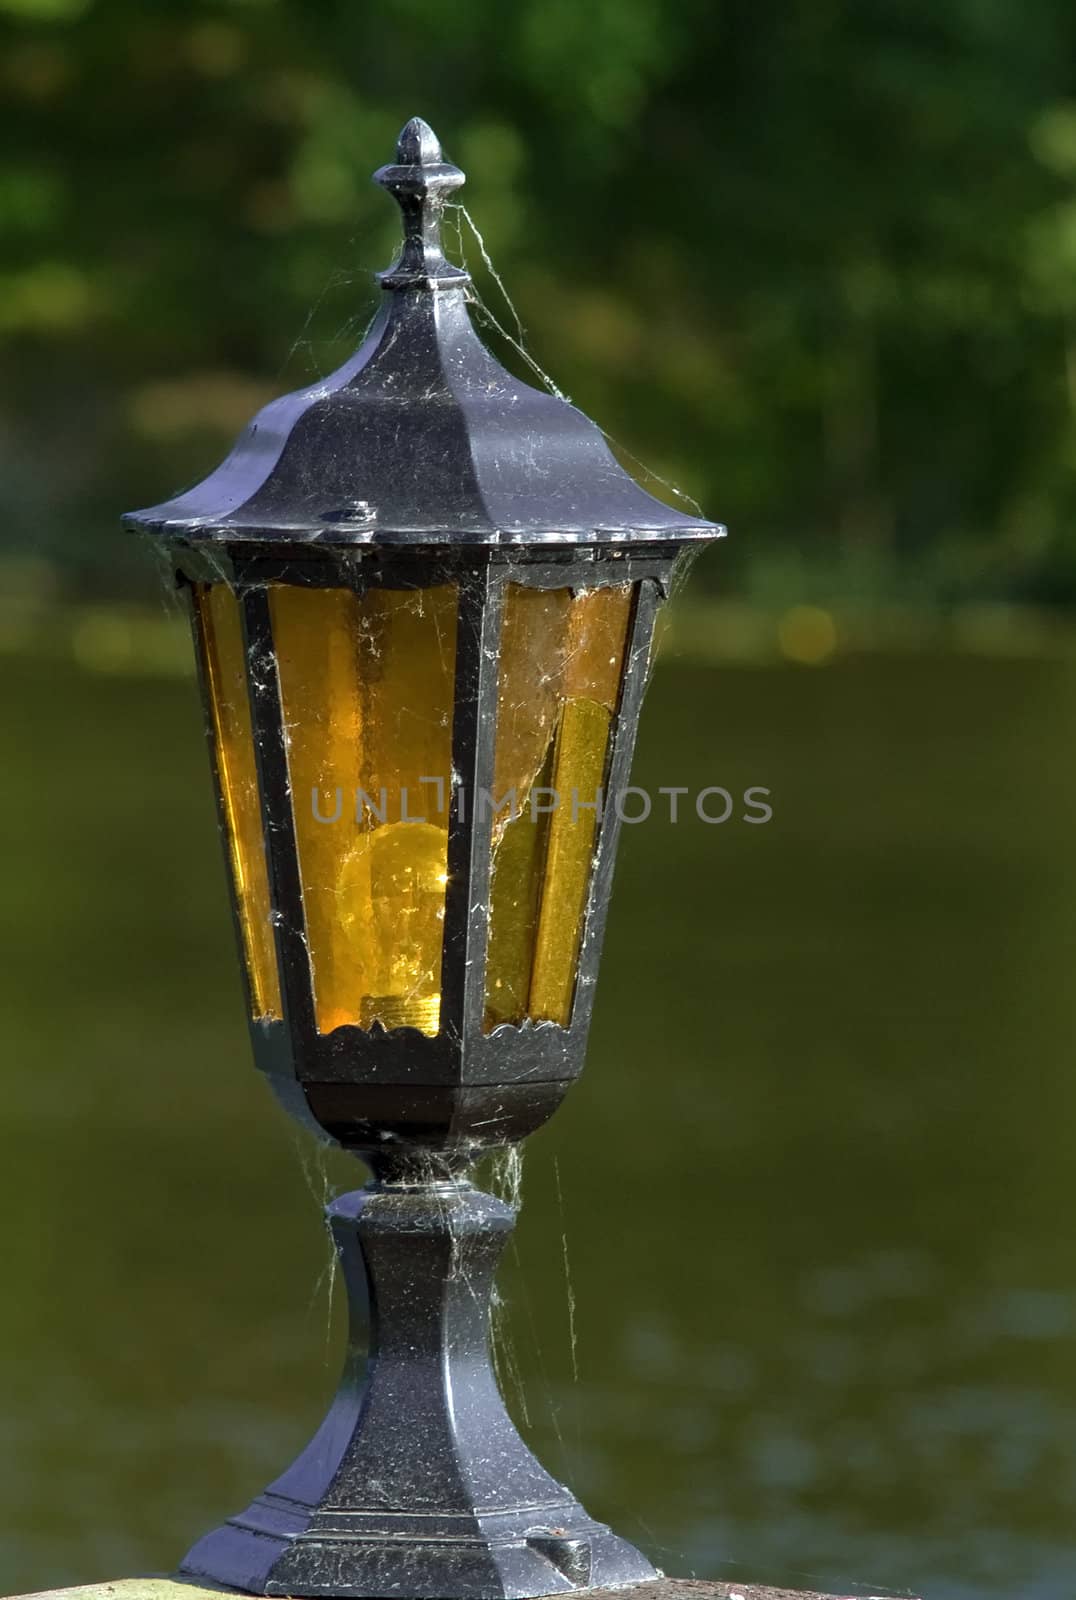 the old lamp by Mariusz1962